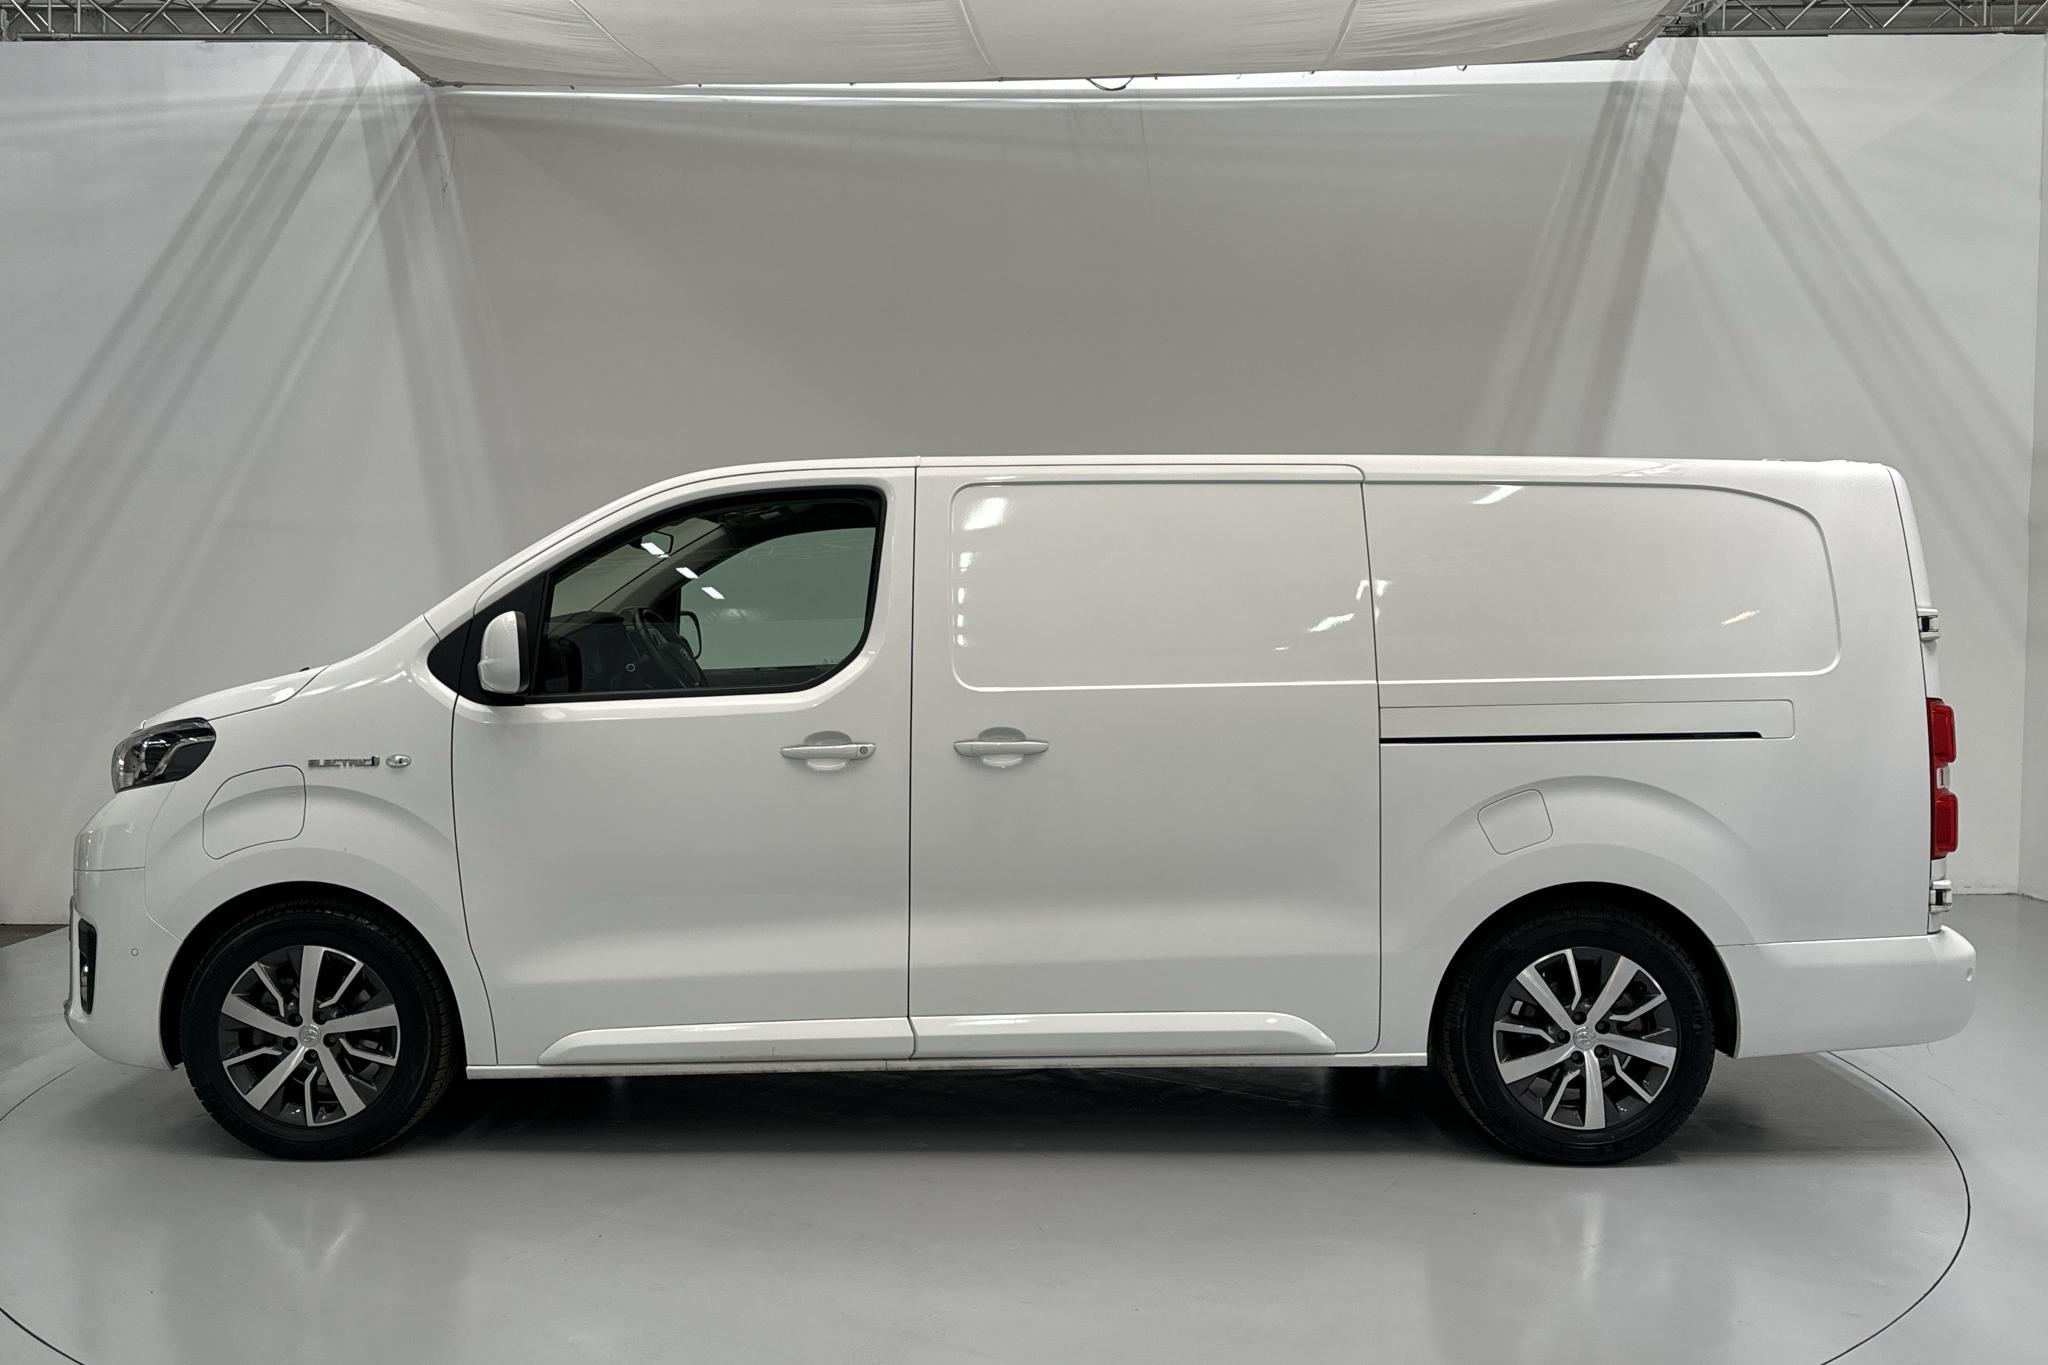 Toyota PROACE Verso Electric Shuttle 50 kWh (136hk) - 12 560 km - Automatic - white - 2021